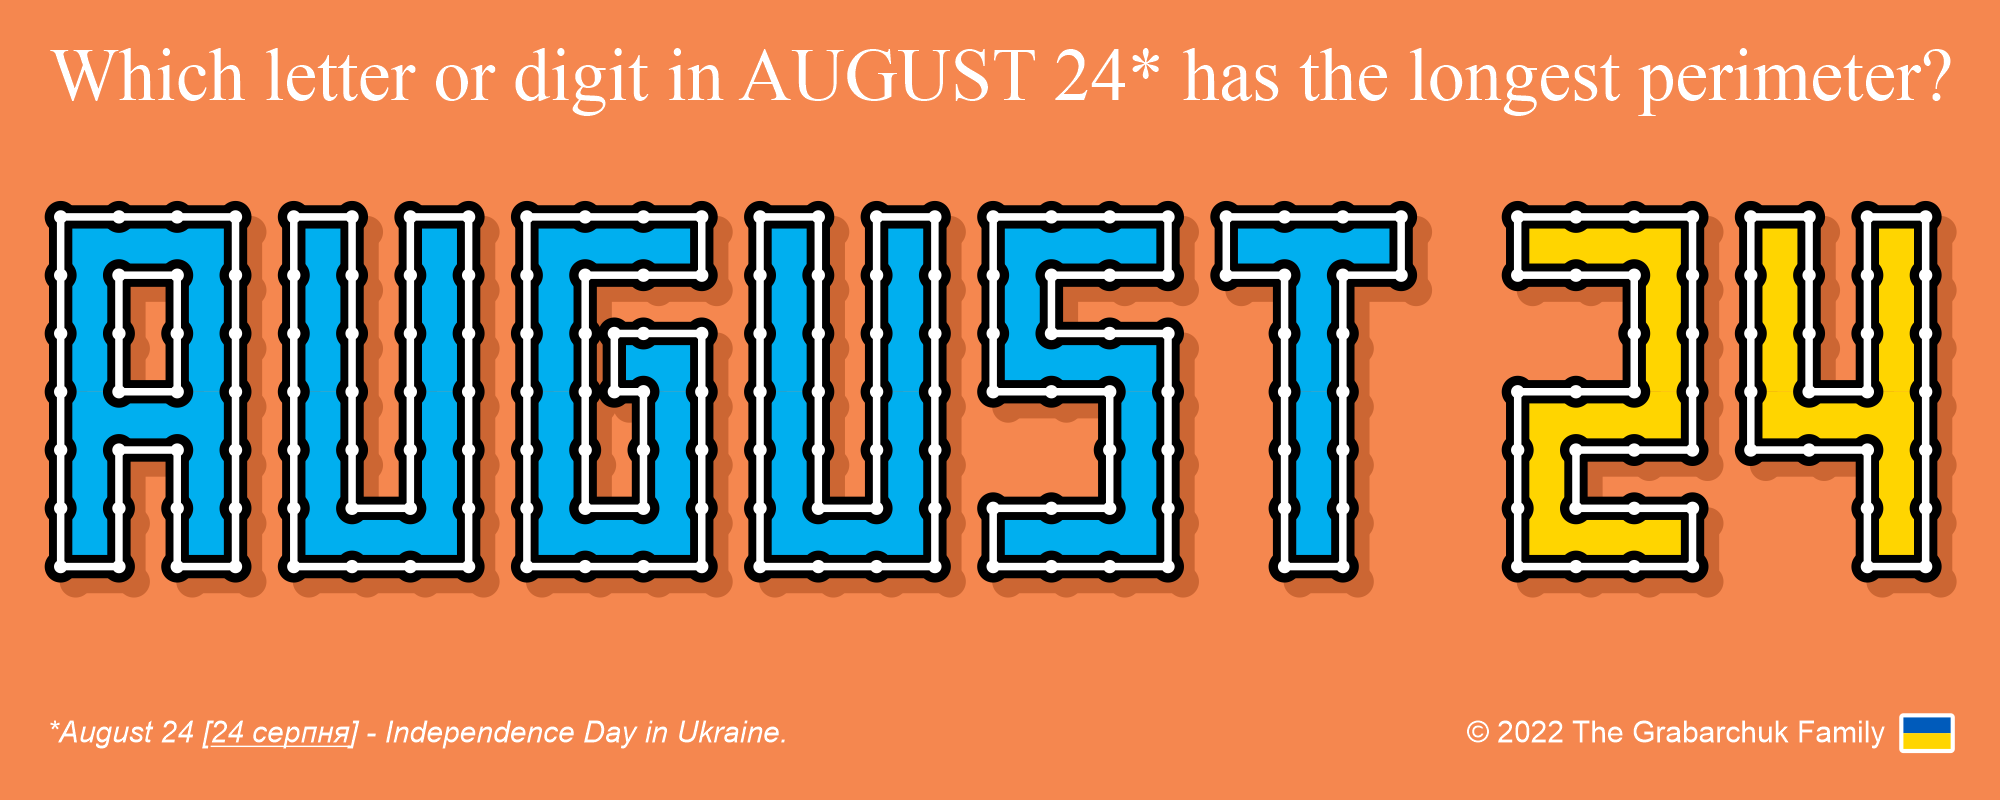 August 24